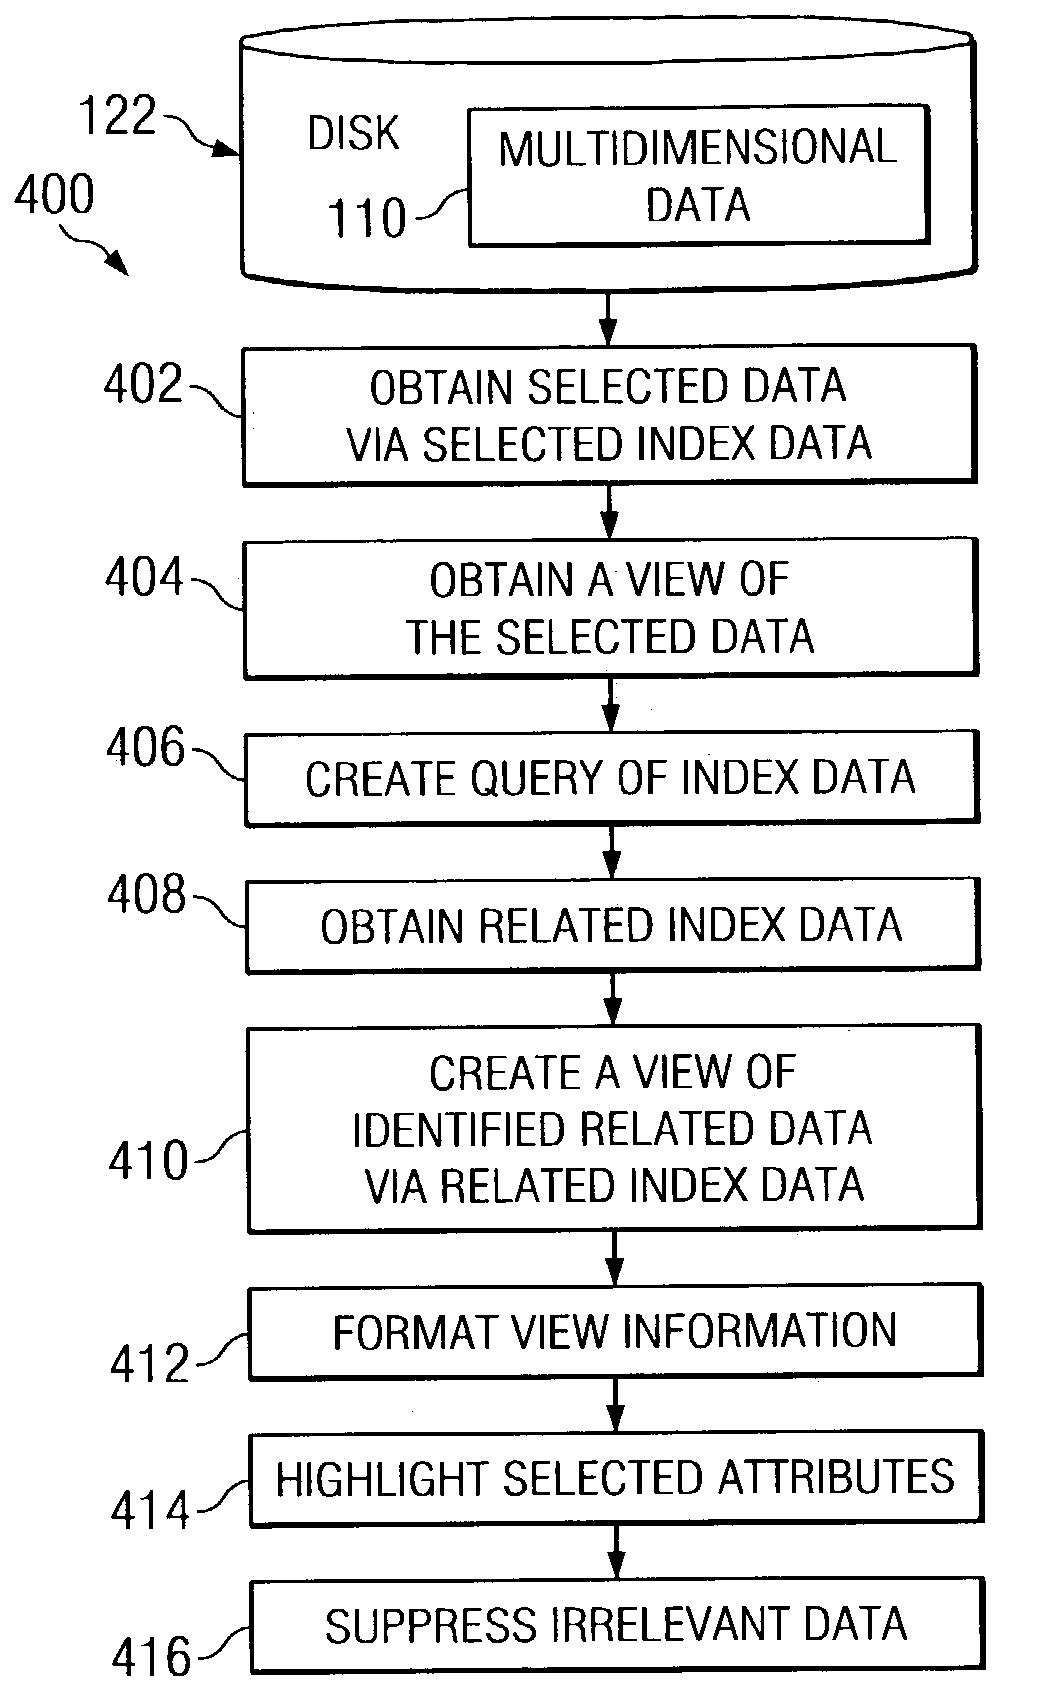 Methods to identify related data in a multidimensional database